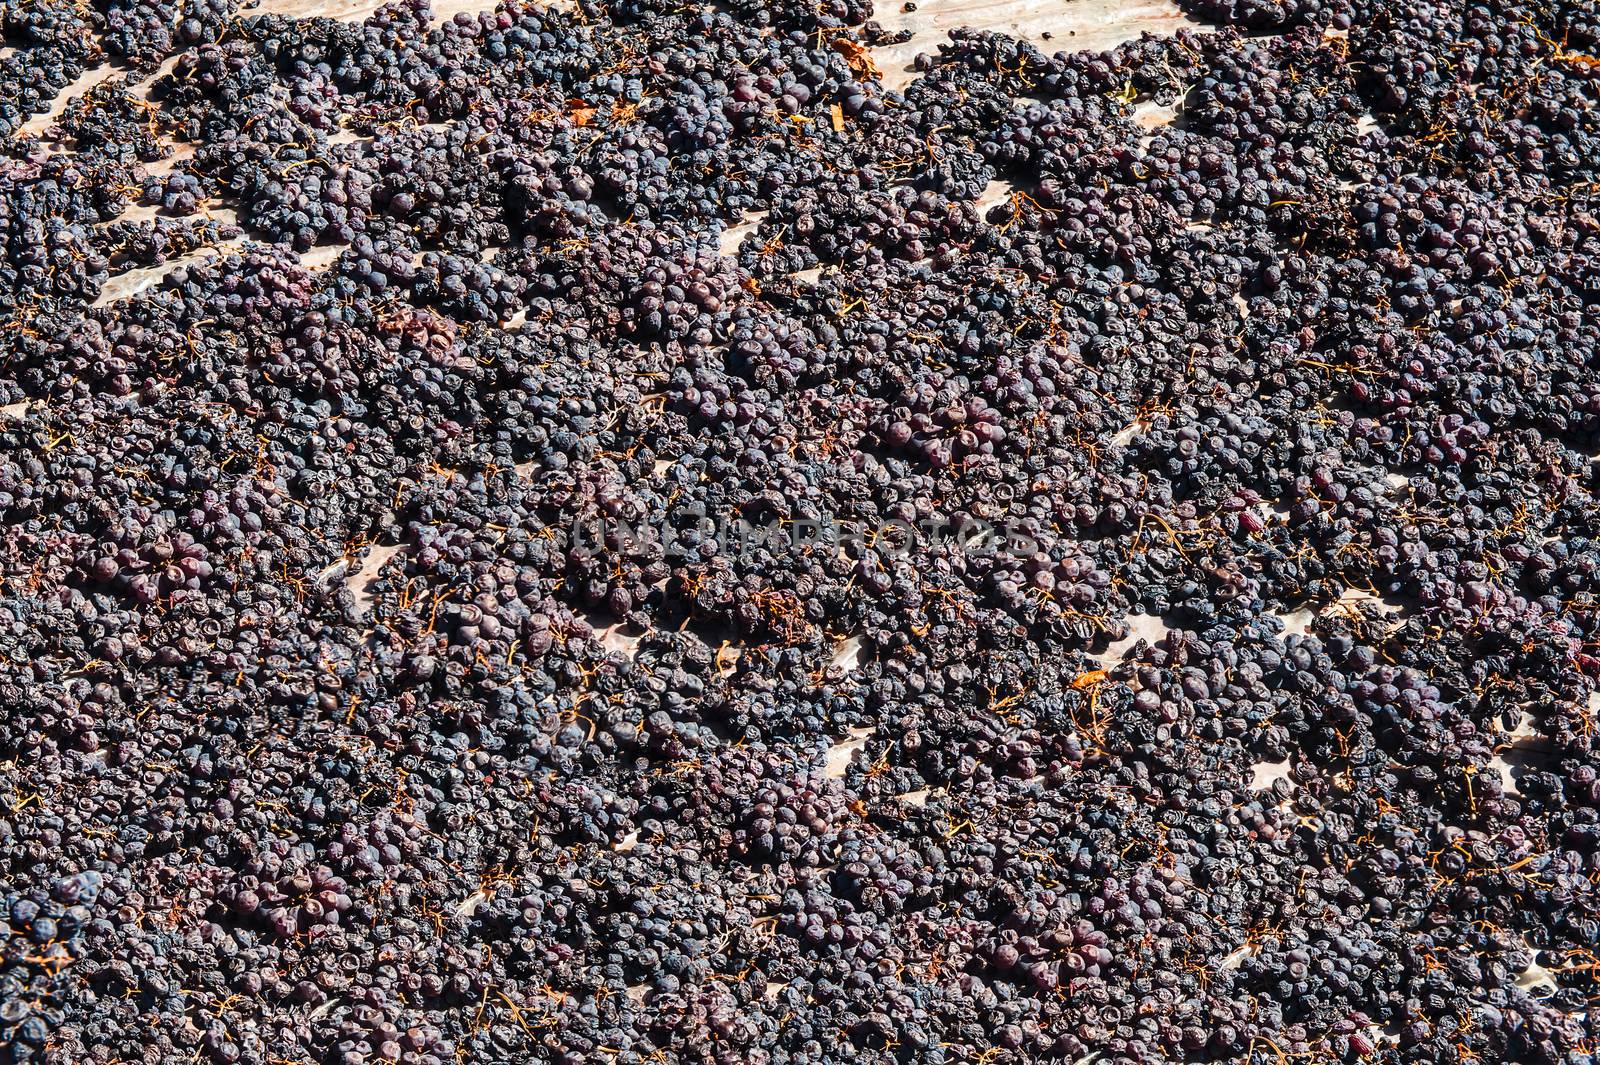 Grapes are being dried outisde to create raisins in Tureky